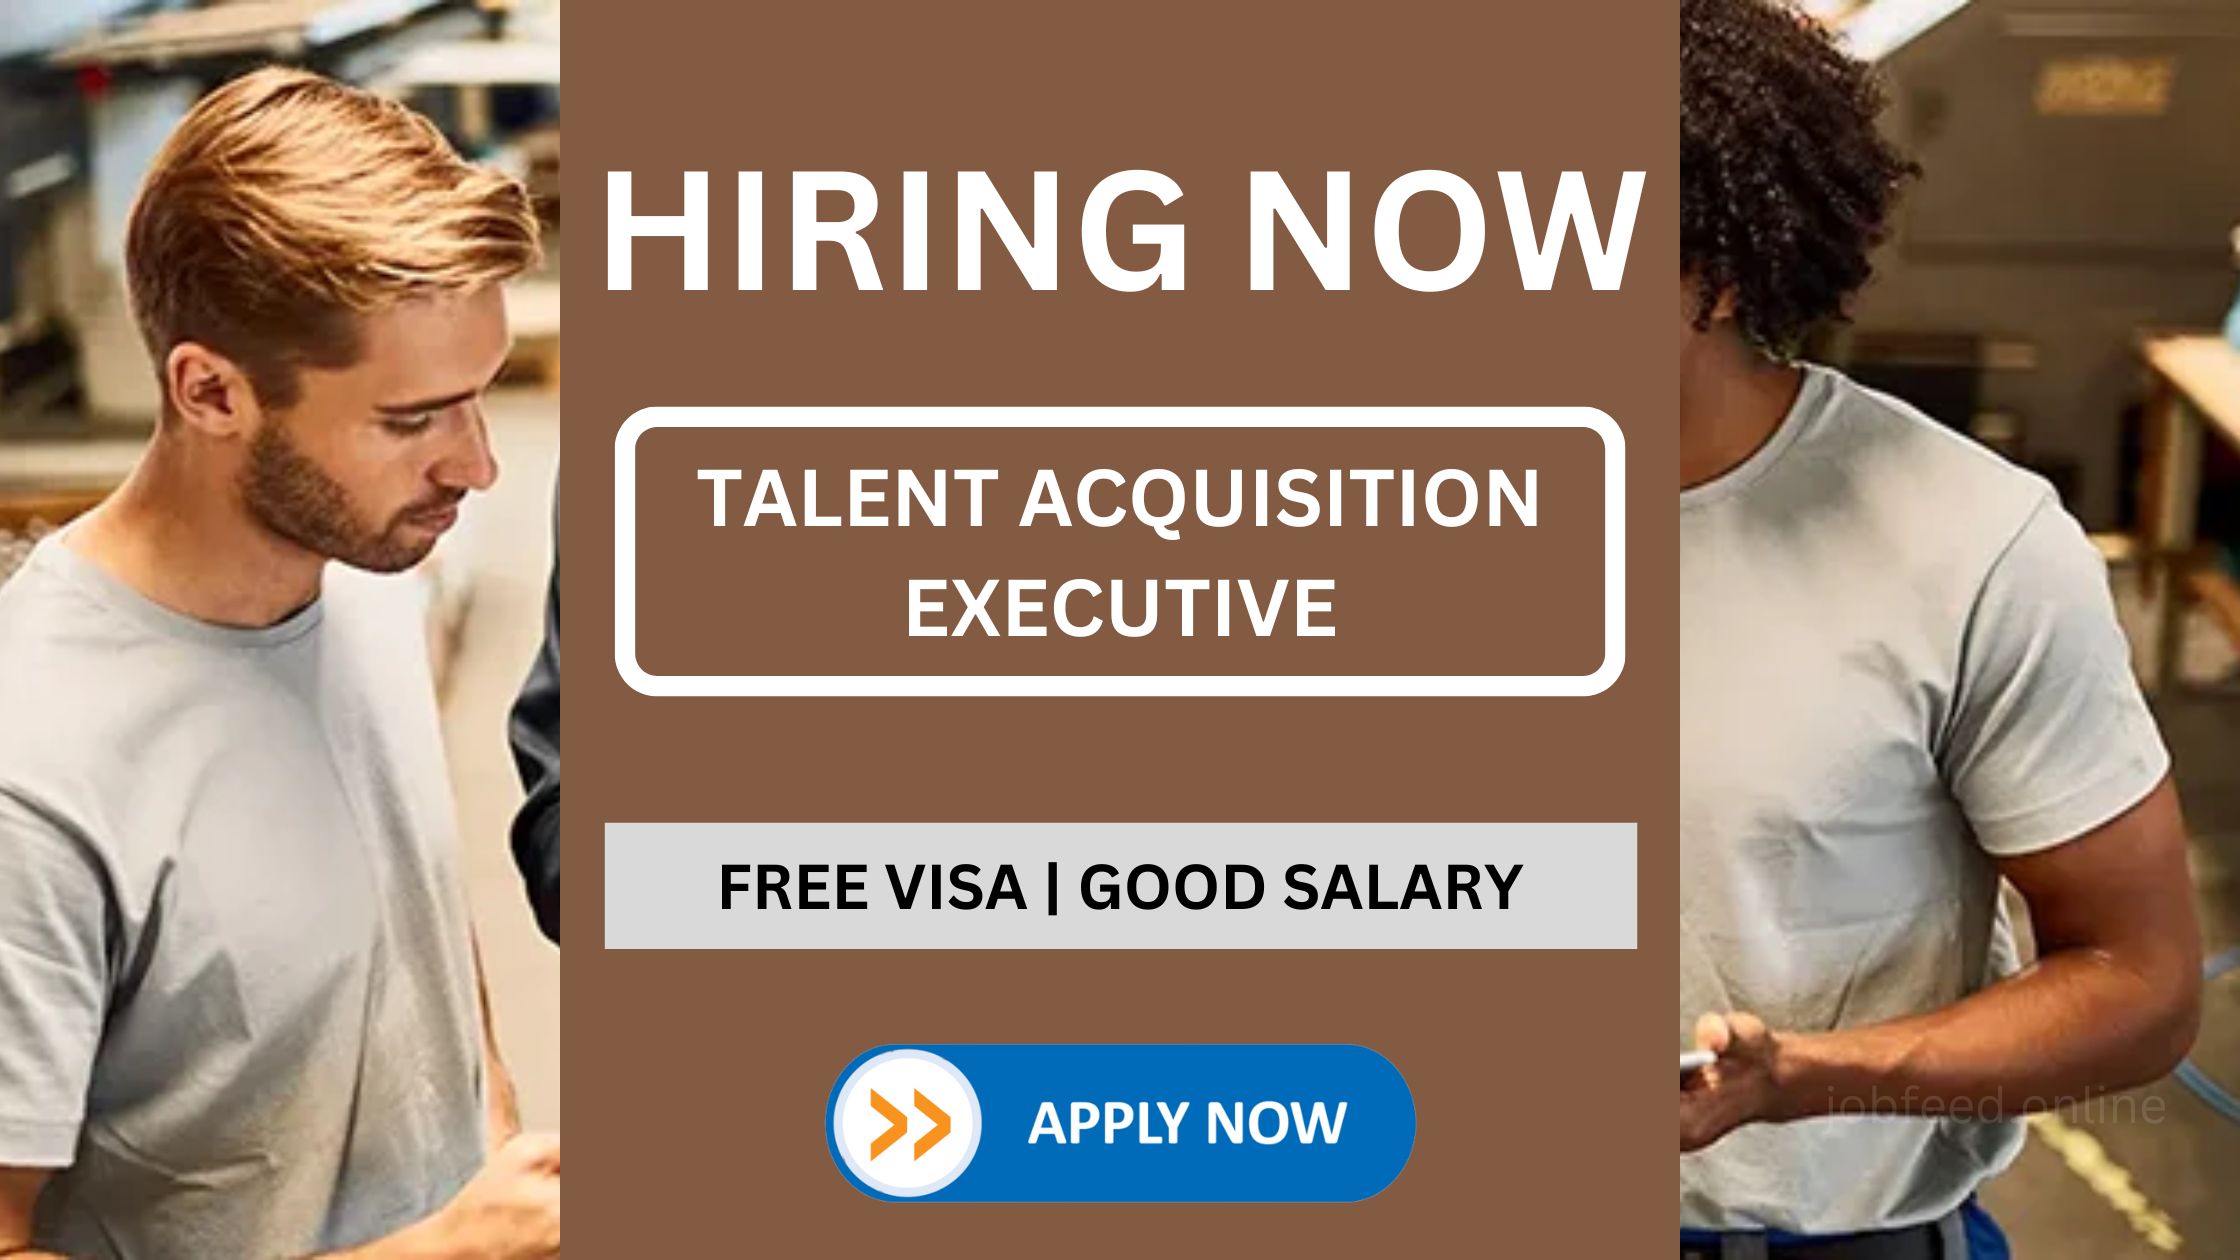 Hiring Talent Acquisition Executive in UAE